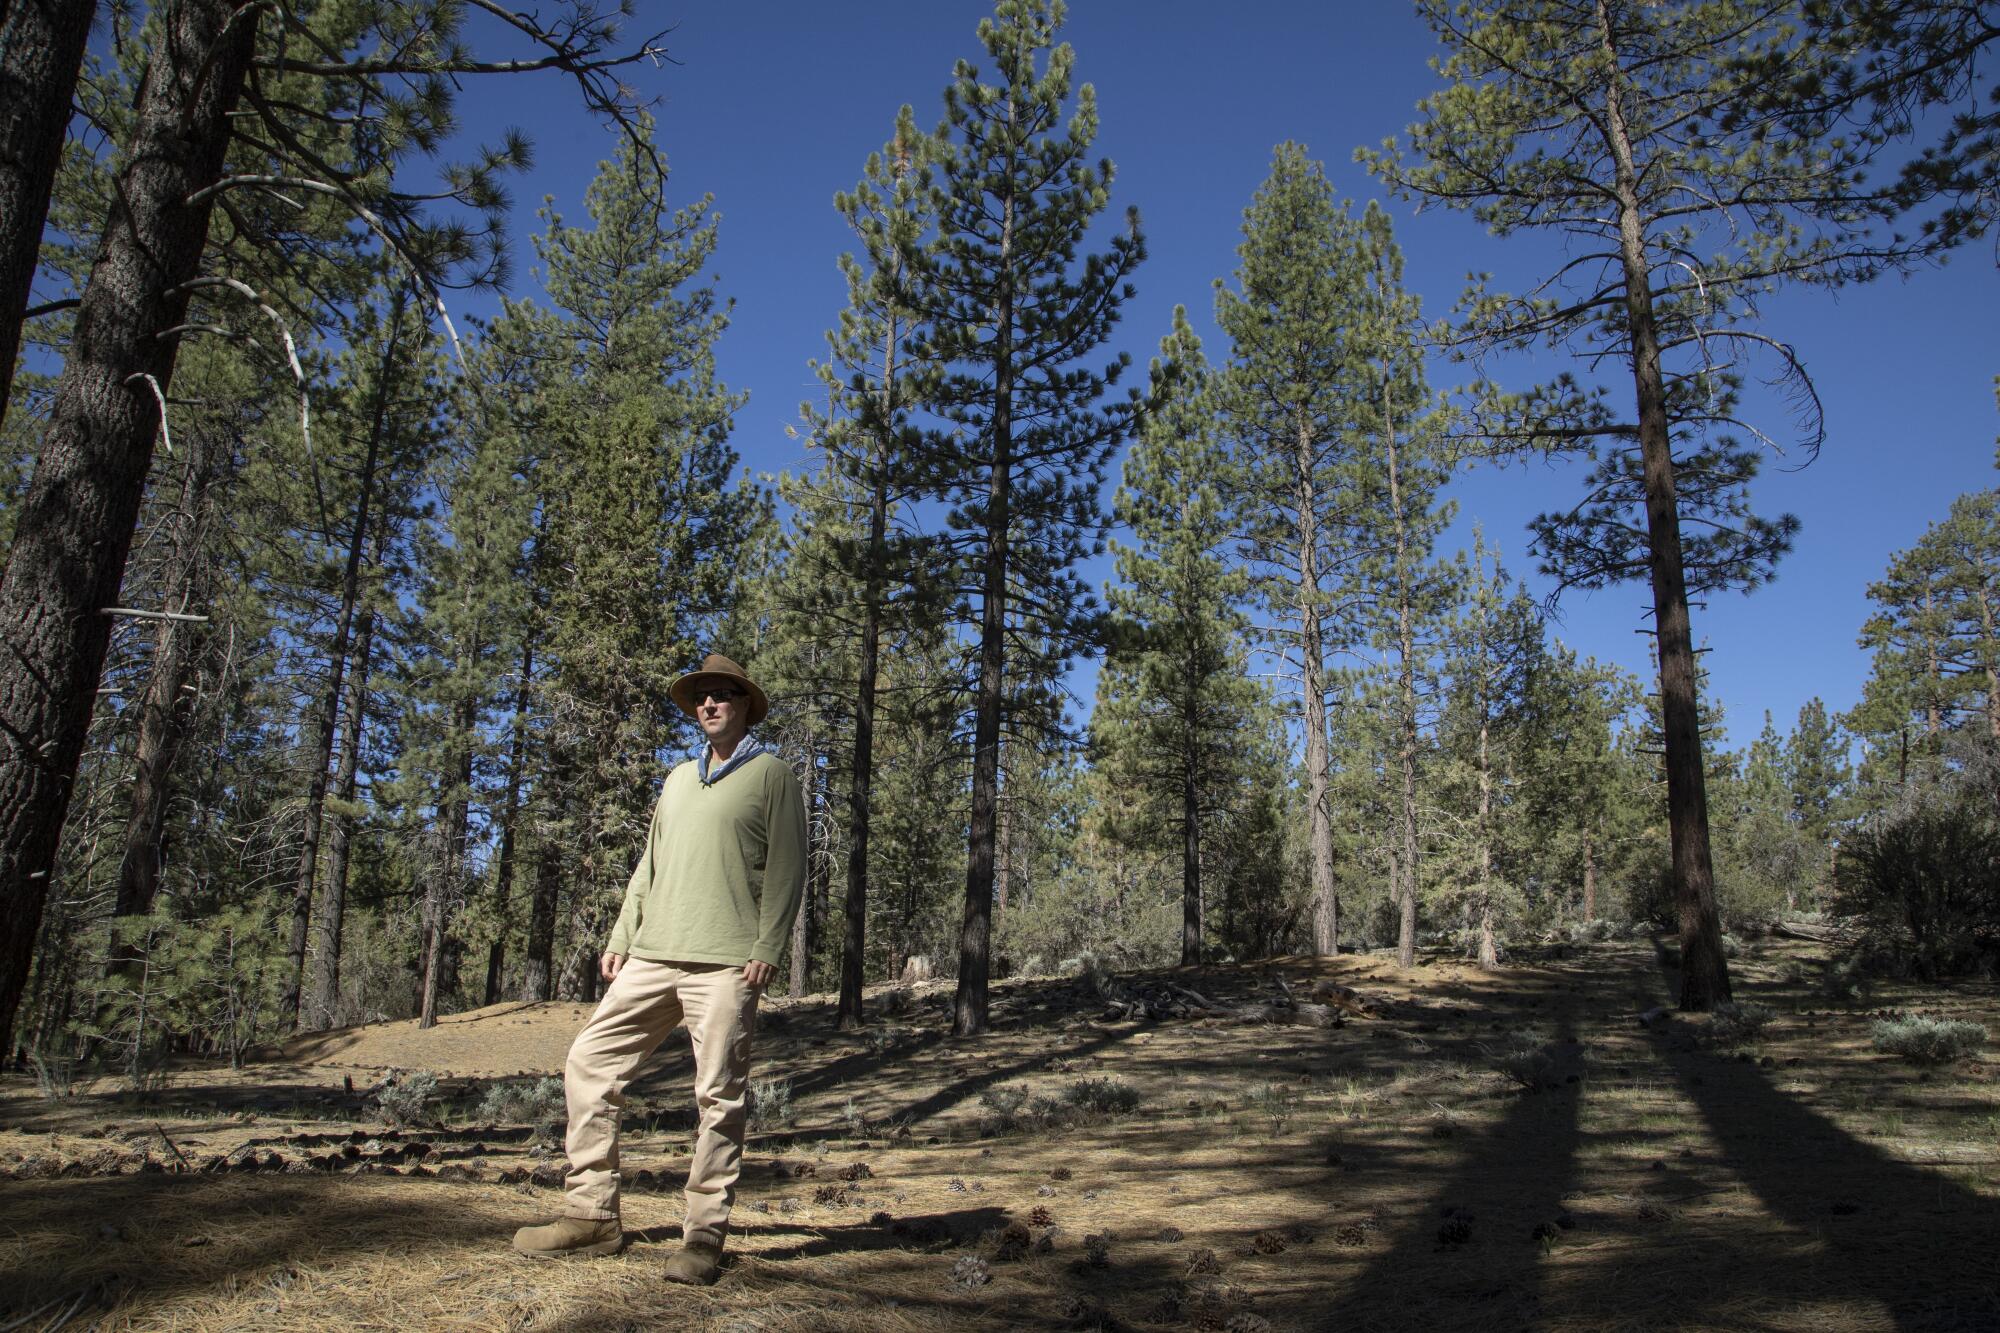 Chad Hanson, a research ecologist with the John Muir Project, on the north side of Big Bear Valley.